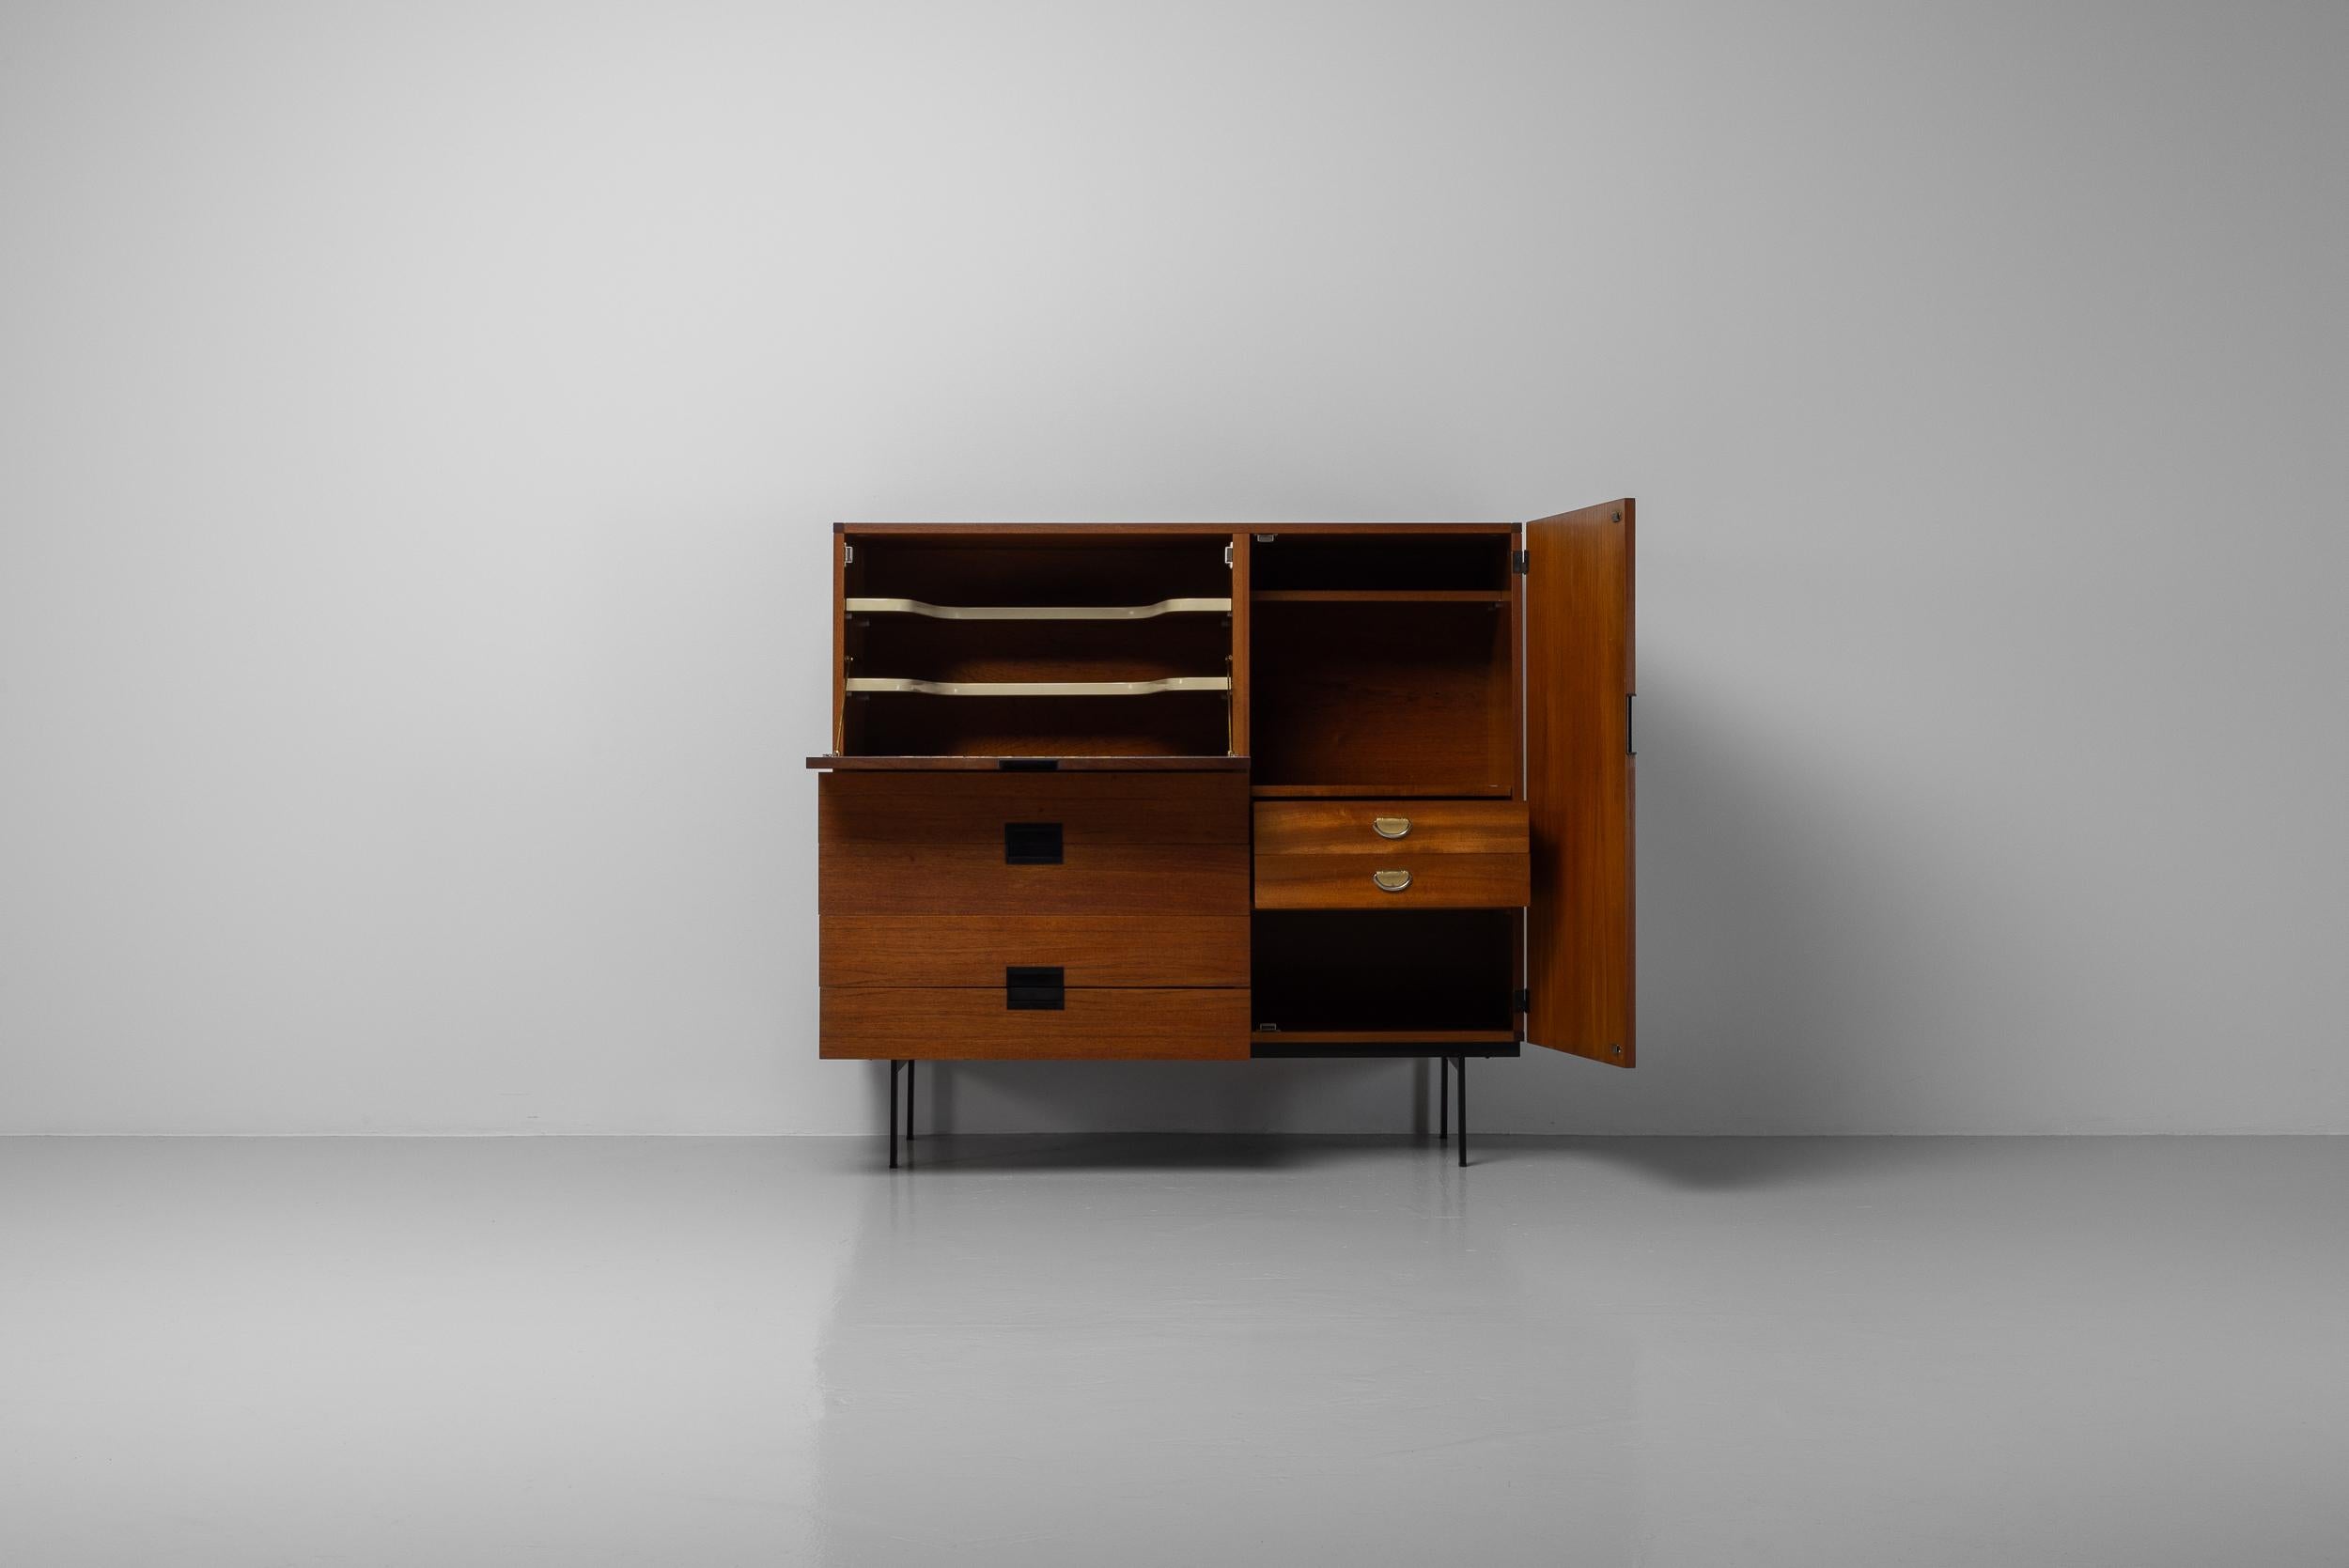 Beautiful minimalist CU06 cabinet designed by Cees Braakman and manufactured by Pastoe in the Netherlands in 1958. A wonderful piece made from teak wood veneer. The cabinet also features a black painted metal frame. The handles on the outer doors